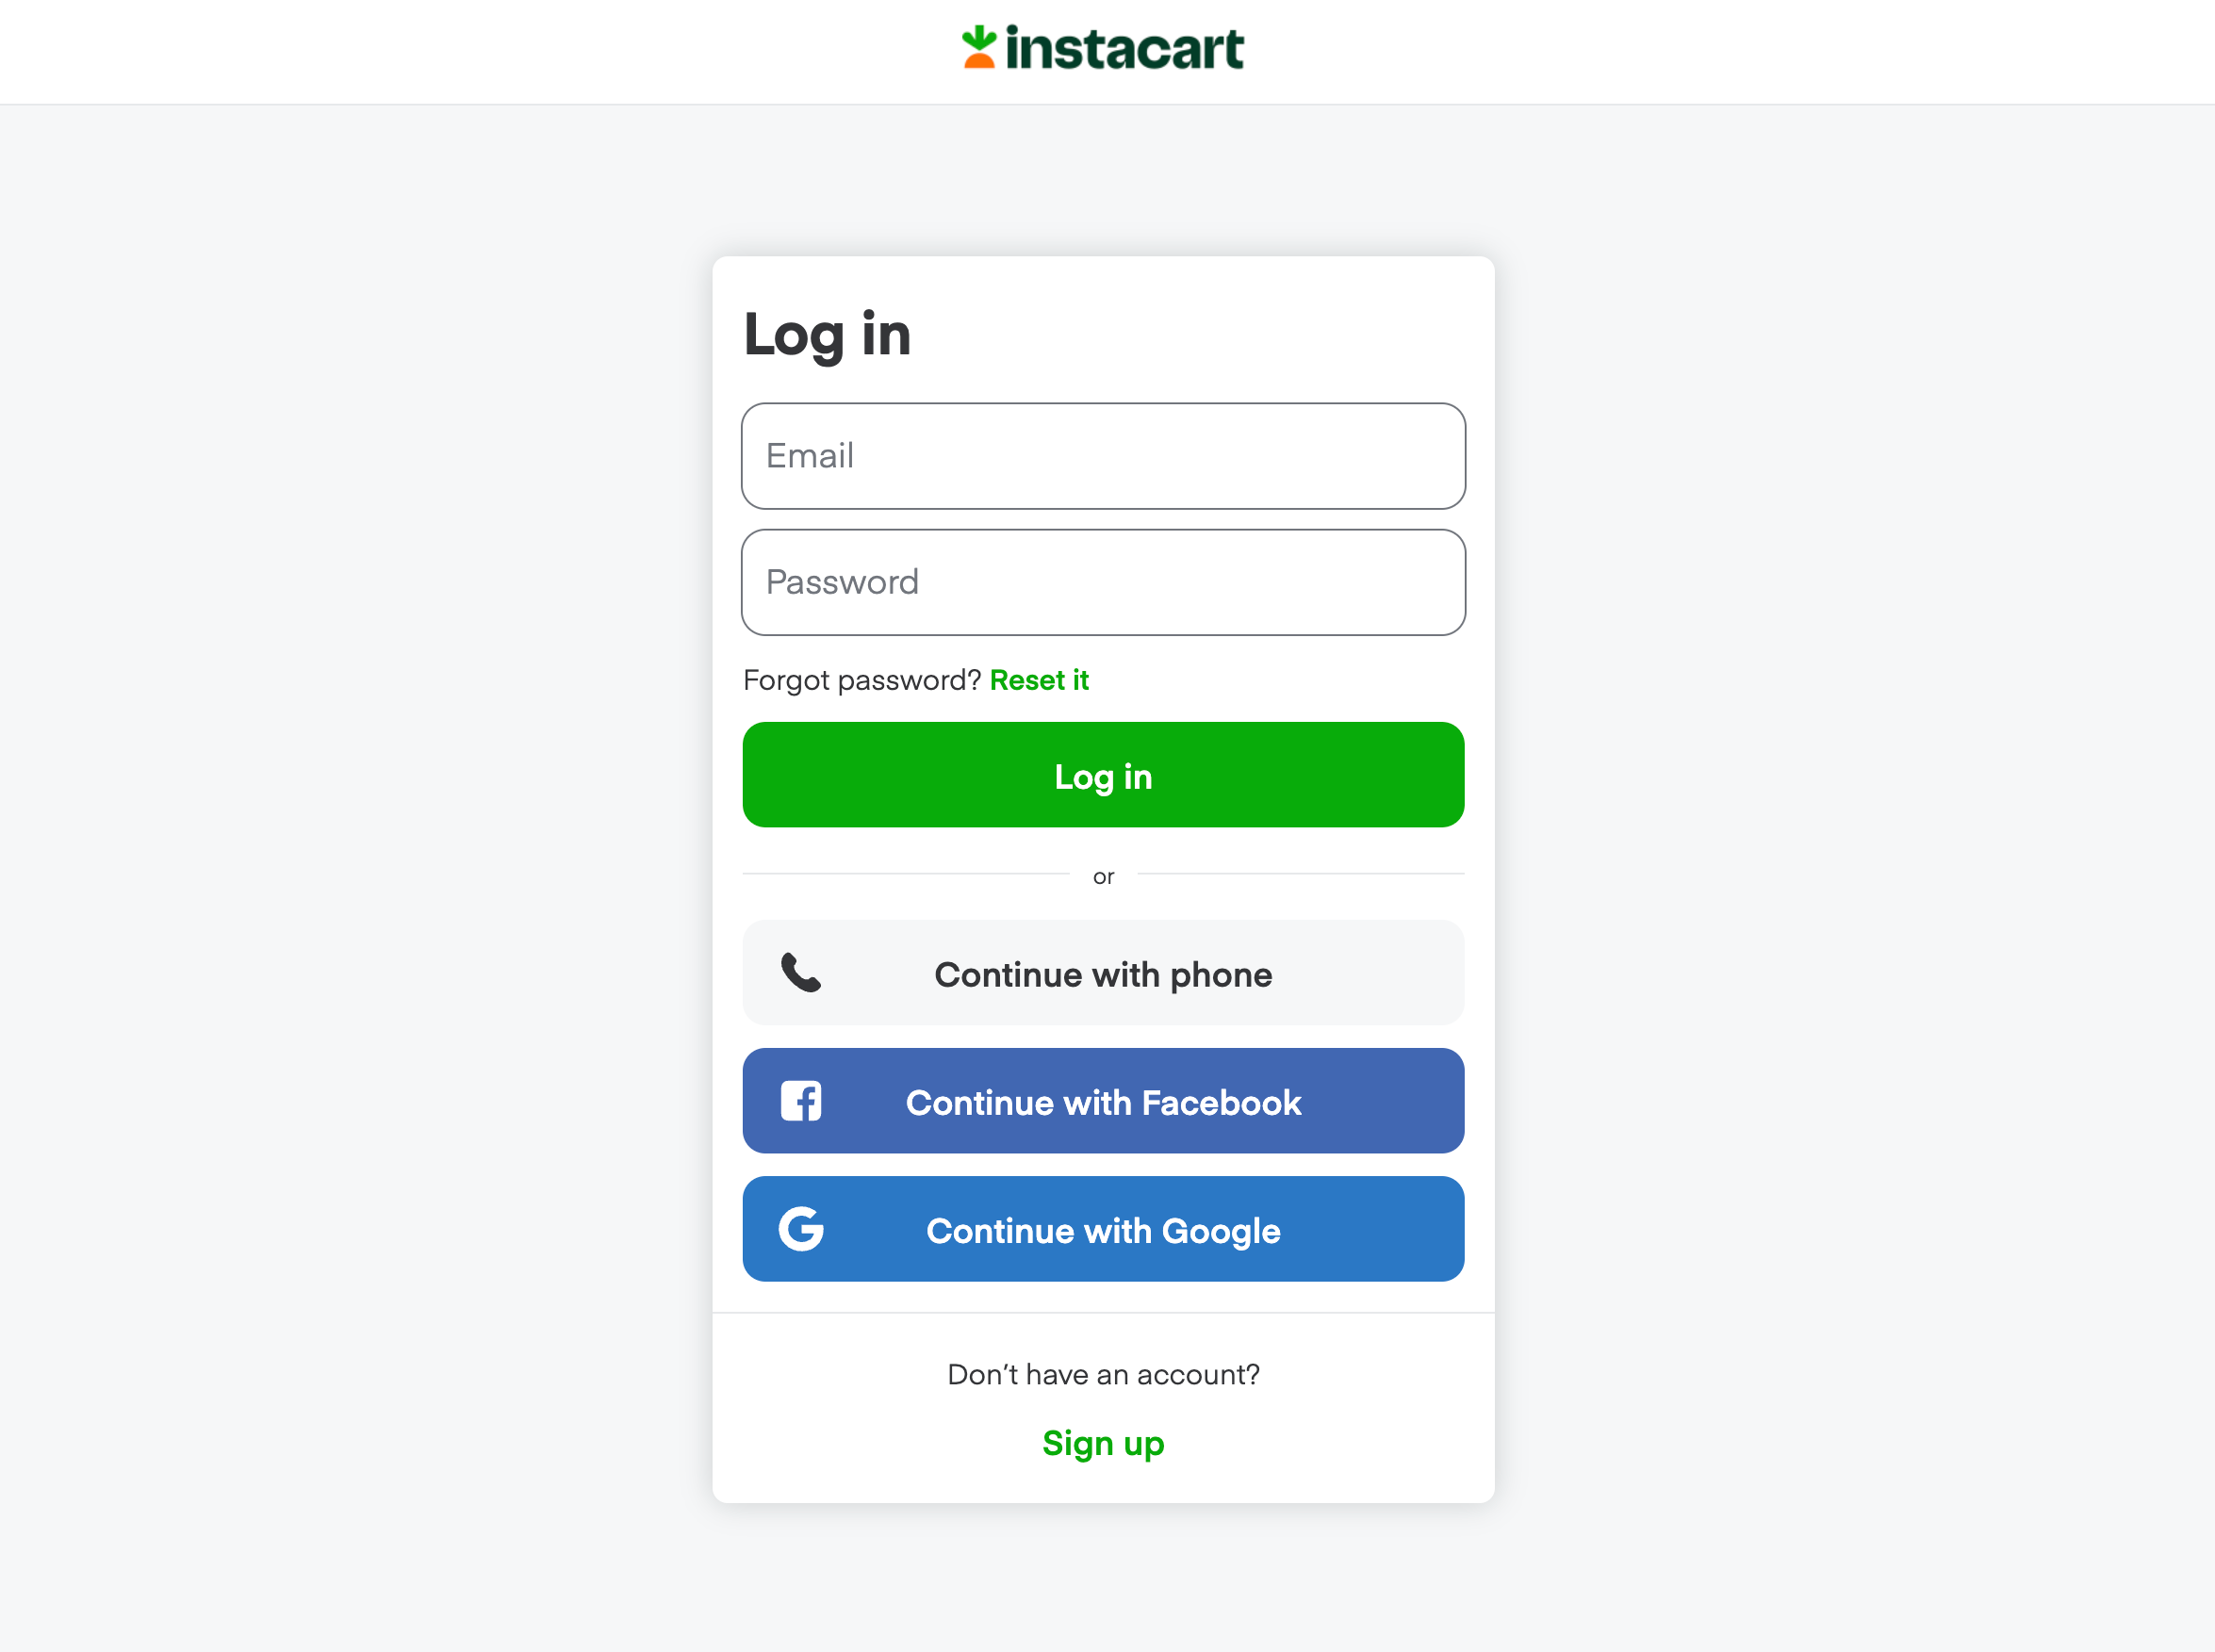 The image show the login page with the following text: Welcome back! Log in with your email and password.